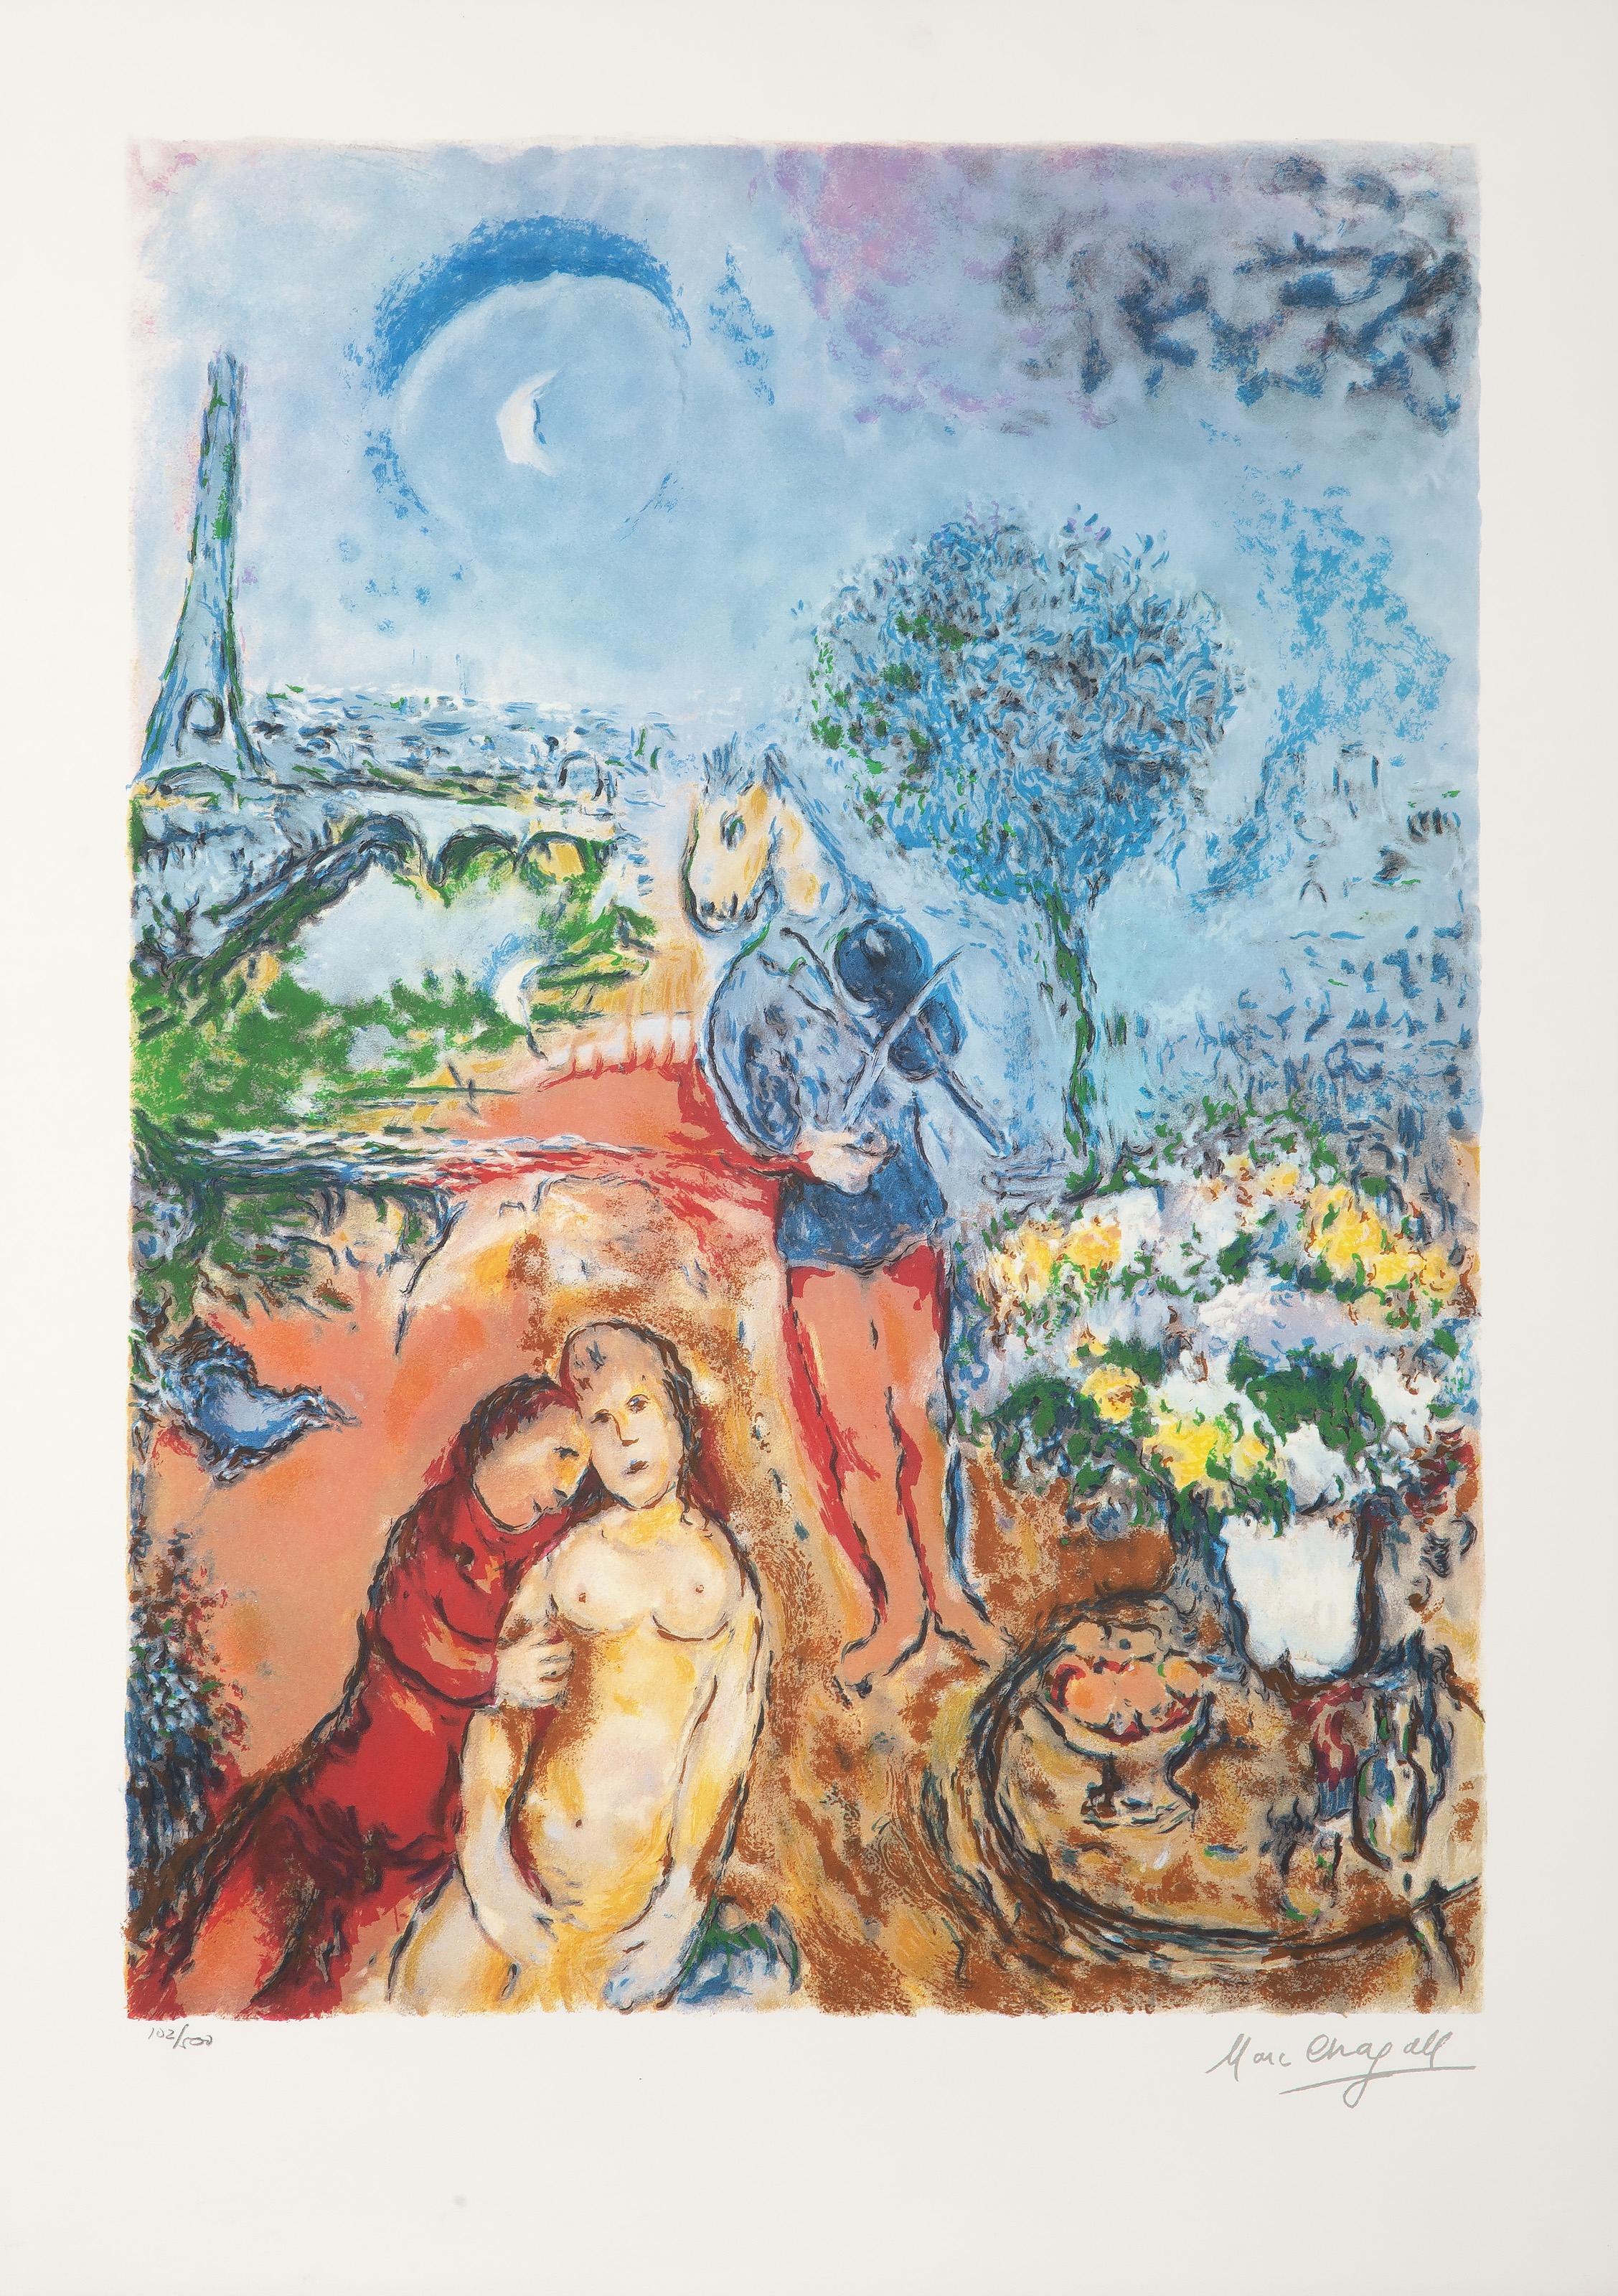 An authorized printing of Eiffel Tower Serenade After Marc Chagall, Russian (1887 - 1985) - with facsimilie signature. Medium: Lithograph on Arches, numbered in pencil, Edition: 500, Image Size: 27.5 x 20 inches, Size: 34 x 24.25 in. (86.36 x 61.6